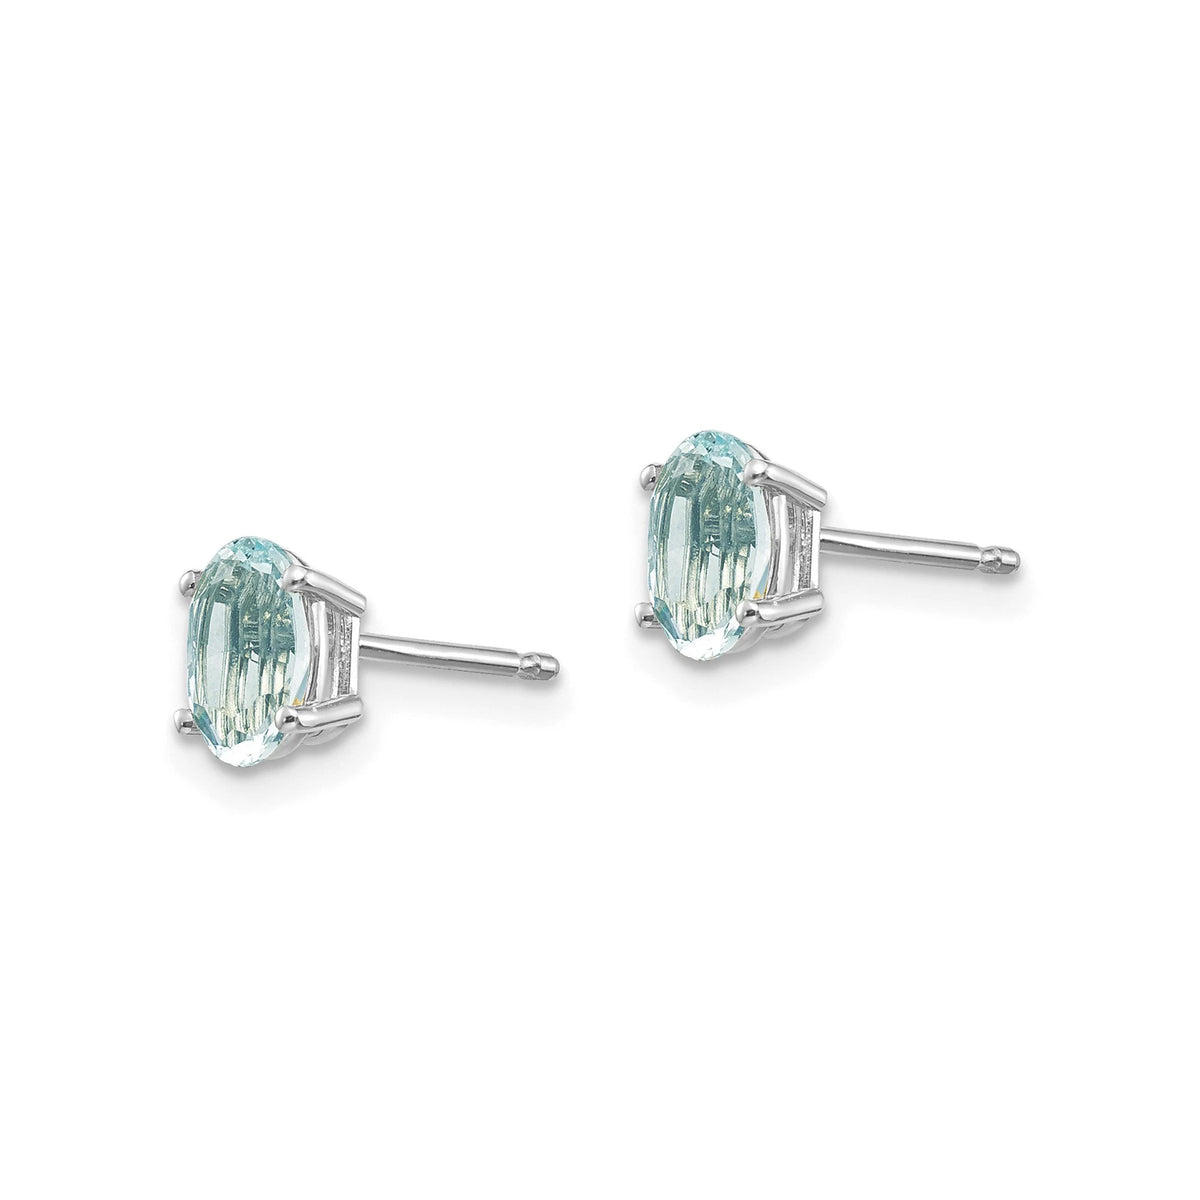 14k Yellow Gold or 14k White Gold 6x4mm Aquamarine Earrings March Birthstone Studs- Gift Box Included - Ships Next Business Day